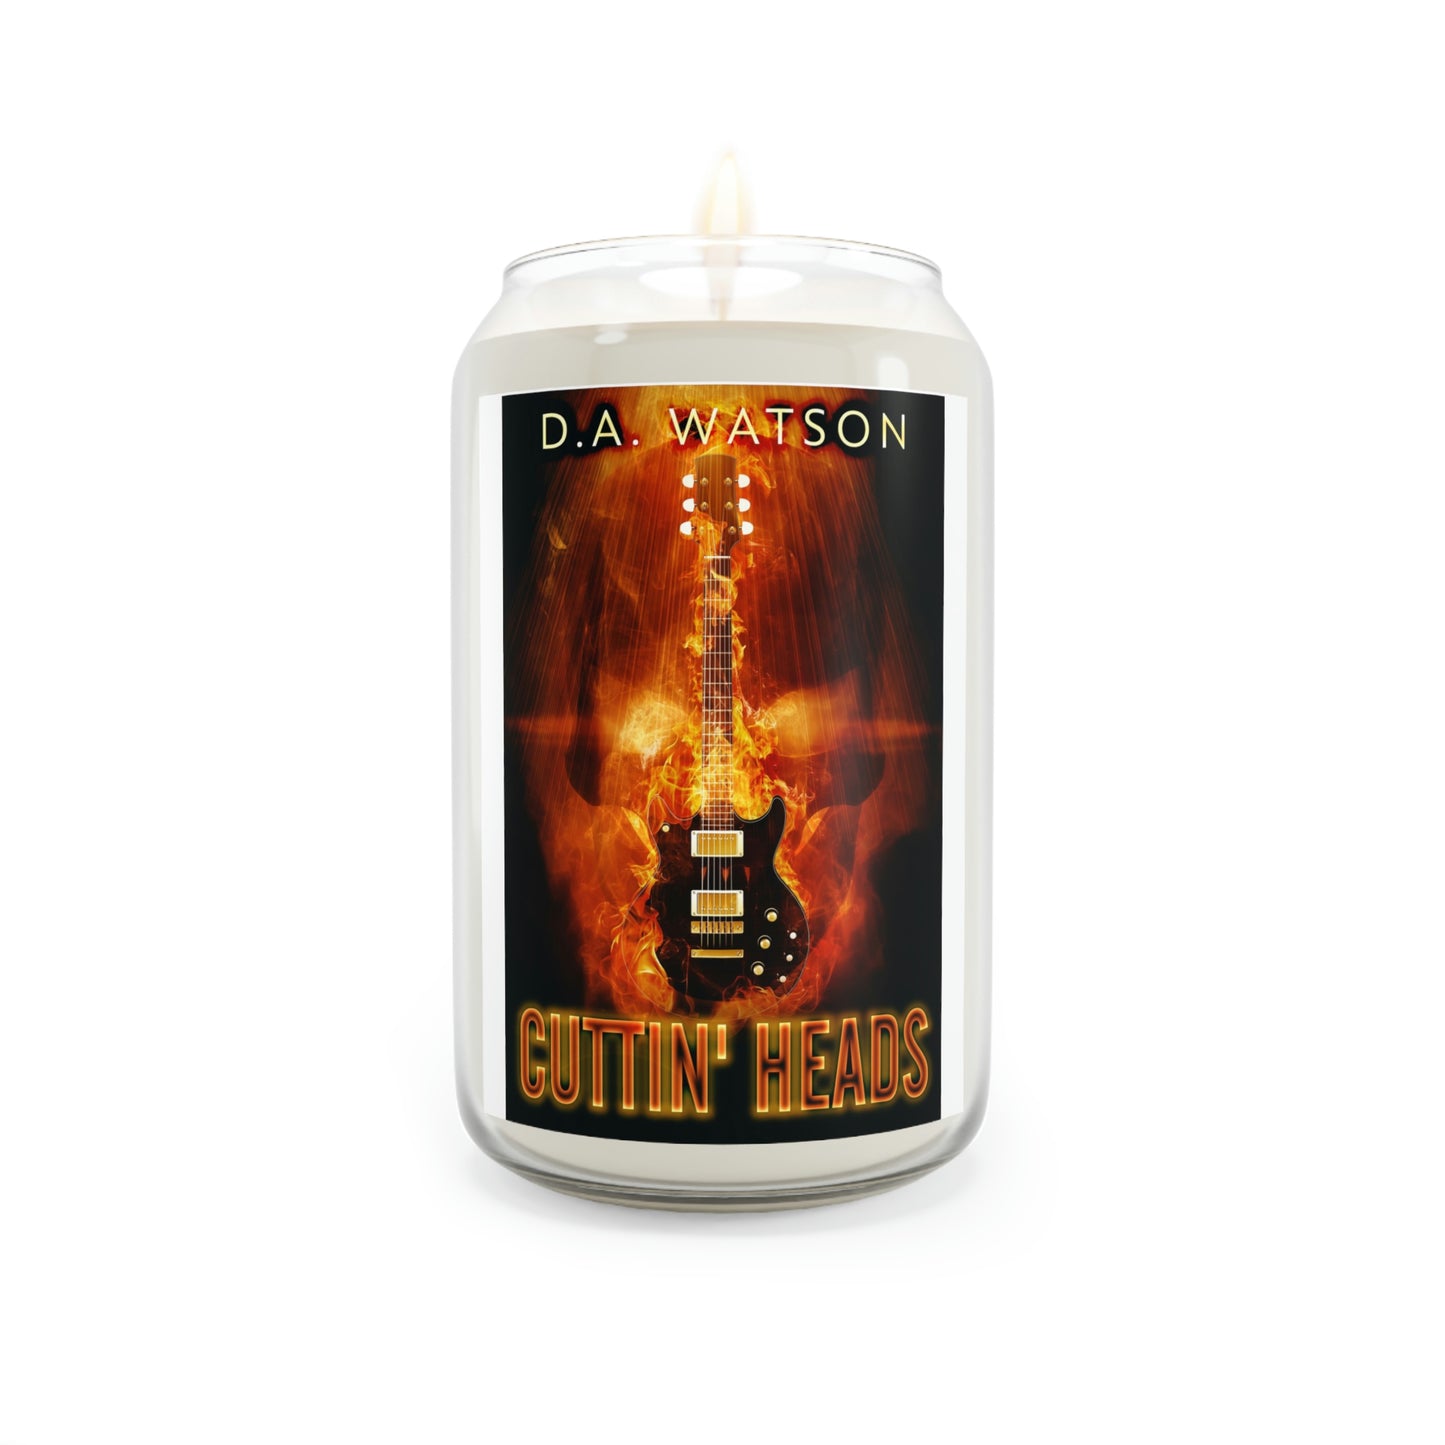 Cuttin' Heads - Scented Candle